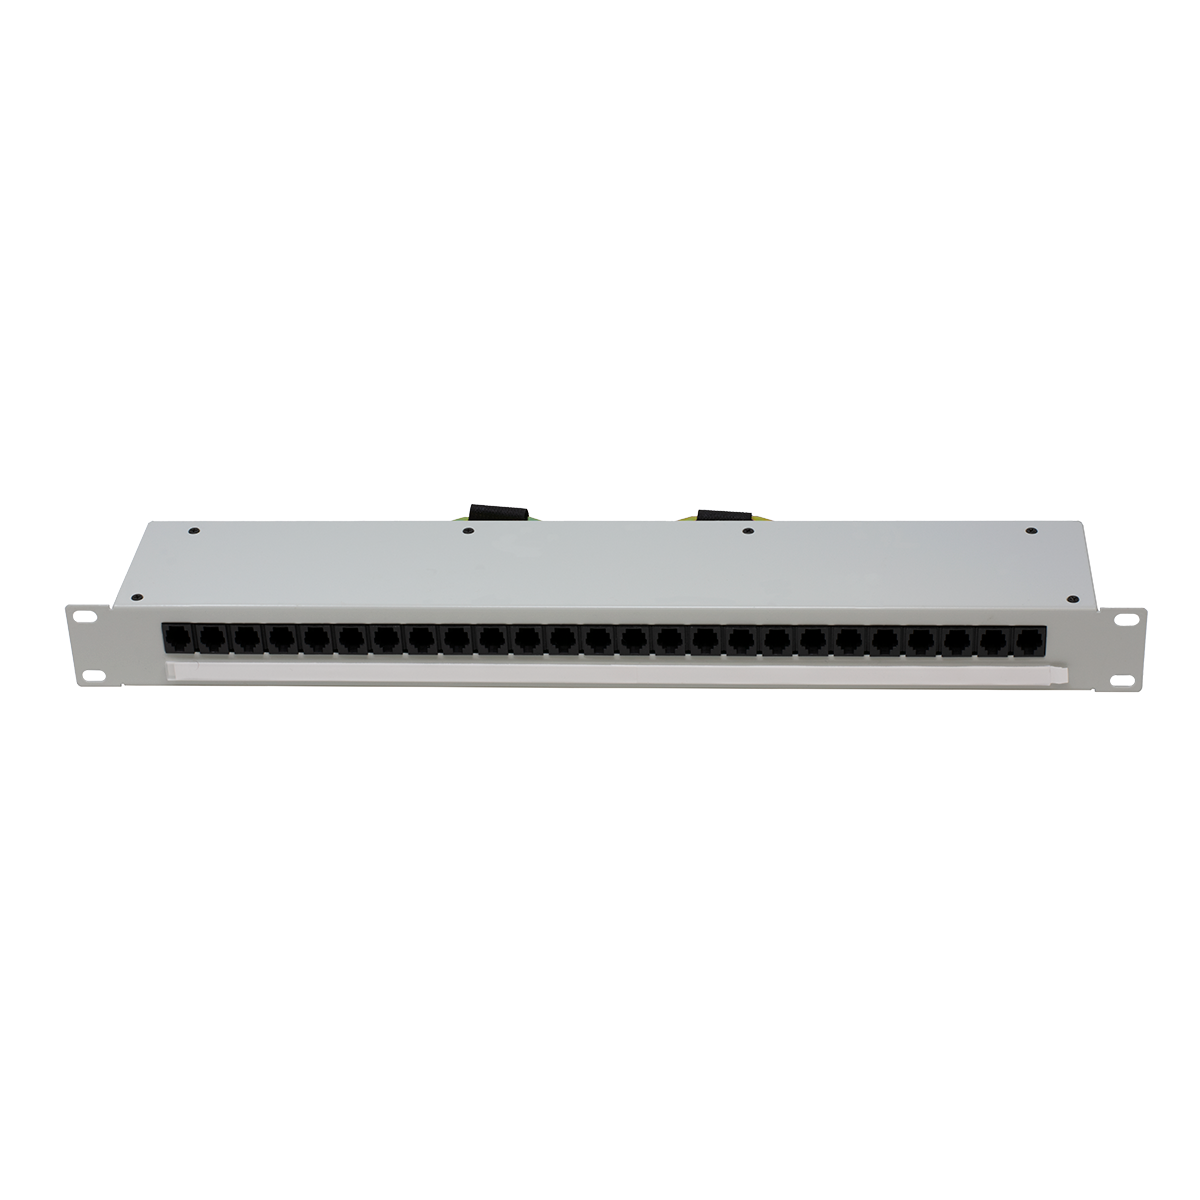  25 Port 1 Pair RJ-11 Patch Panel with Male and Female Amp (Front View)